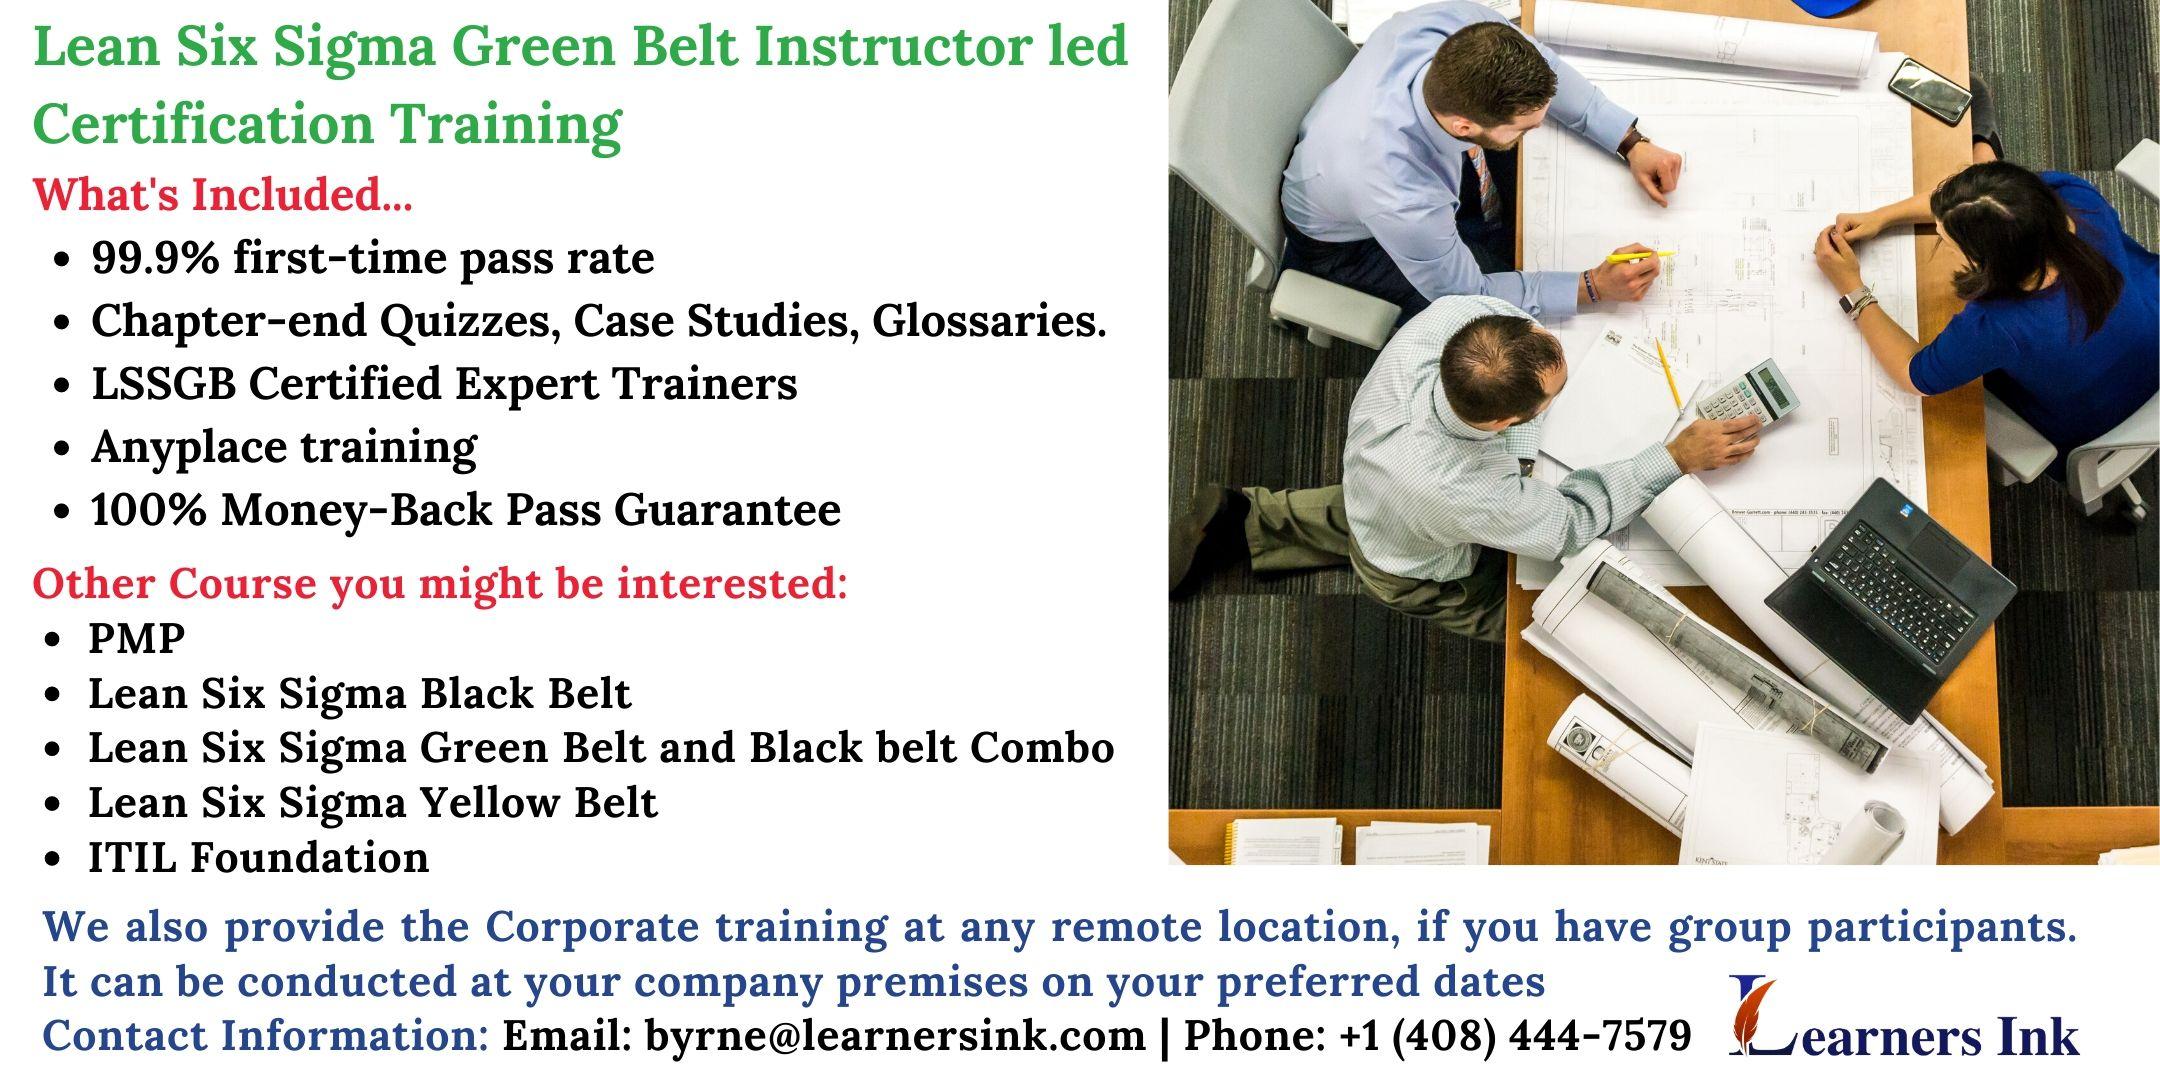 Lean Six Sigma Green Belt Certification Training Course (LSSGB) in Carlsbad